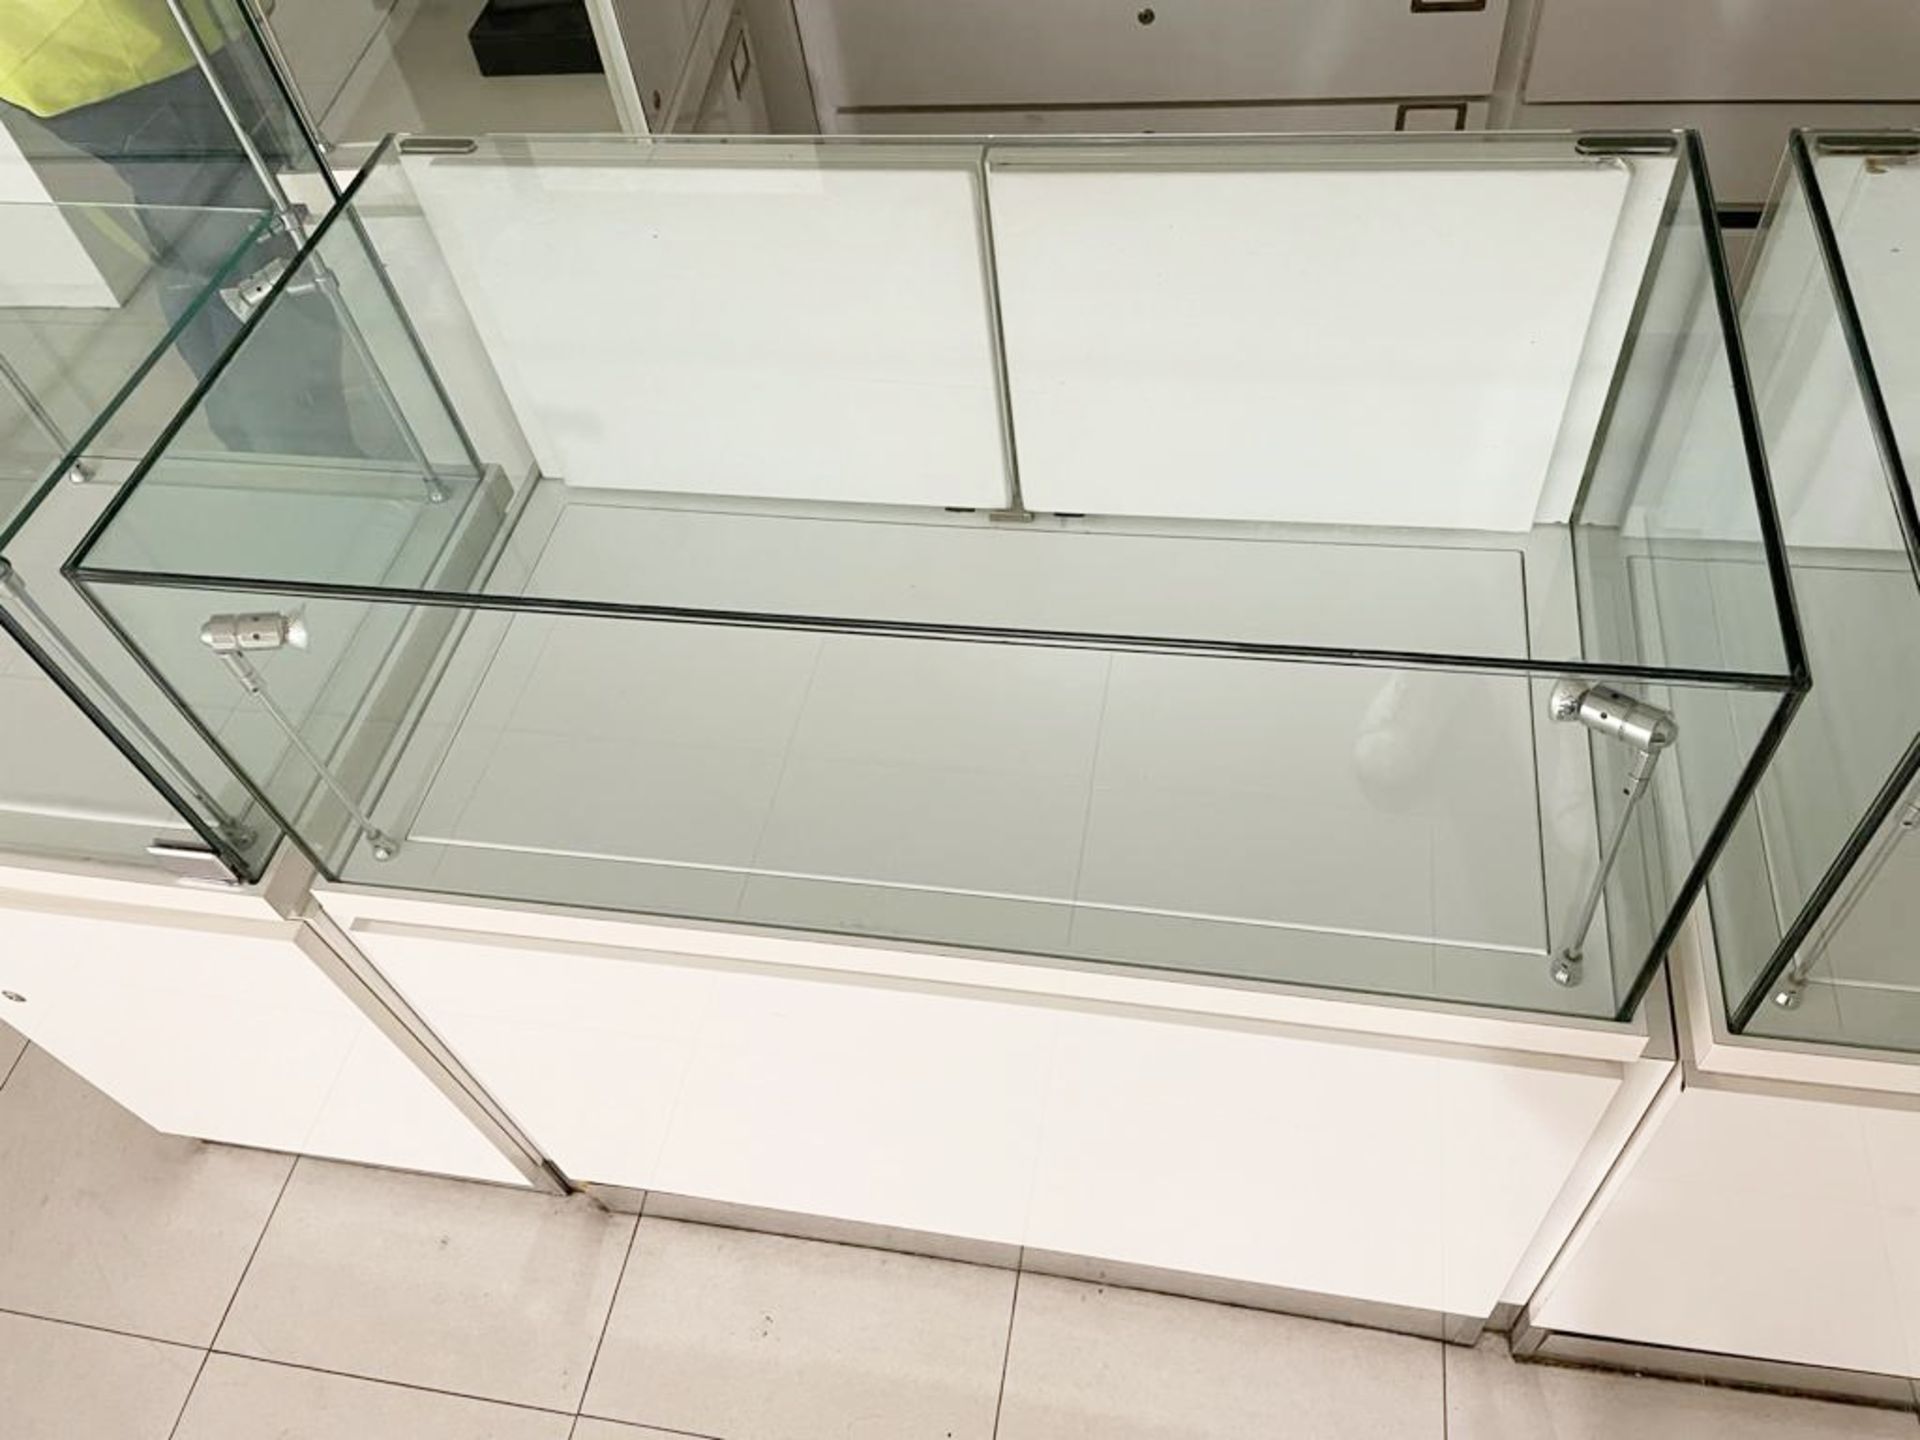 8 x Retail Glass Display Case Counter Cabinets - Features White Gloss Finish, Safety Glass, Internal - Image 10 of 13